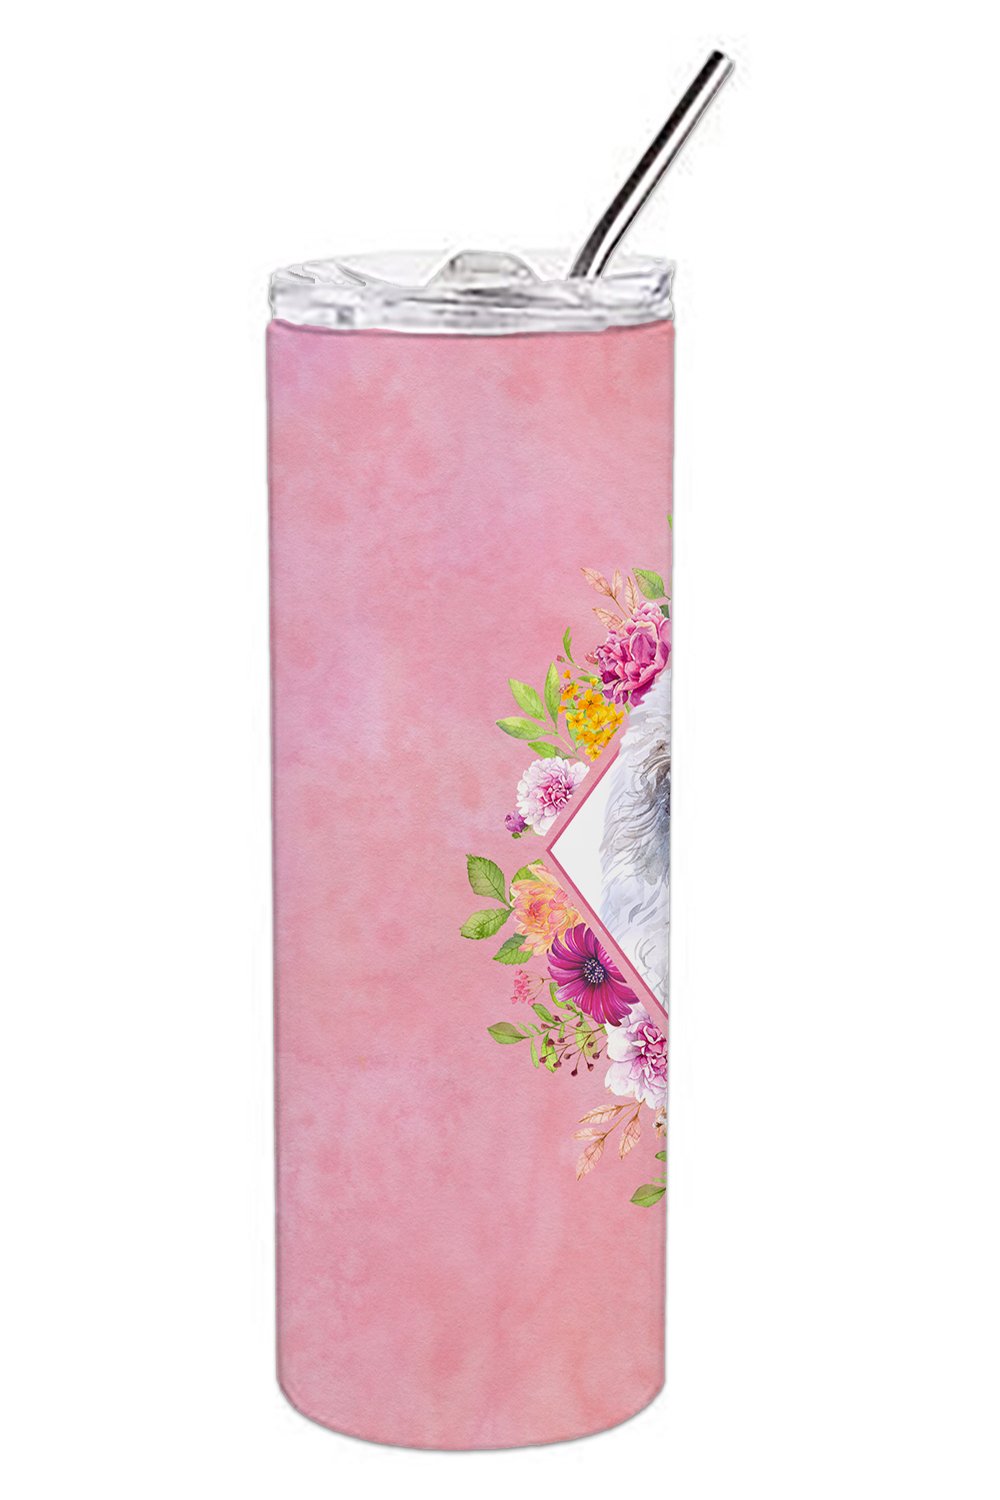 White Mini Poodle Pink Flowers Double Walled Stainless Steel 20 oz Skinny Tumbler CK4172TBL20 by Caroline's Treasures